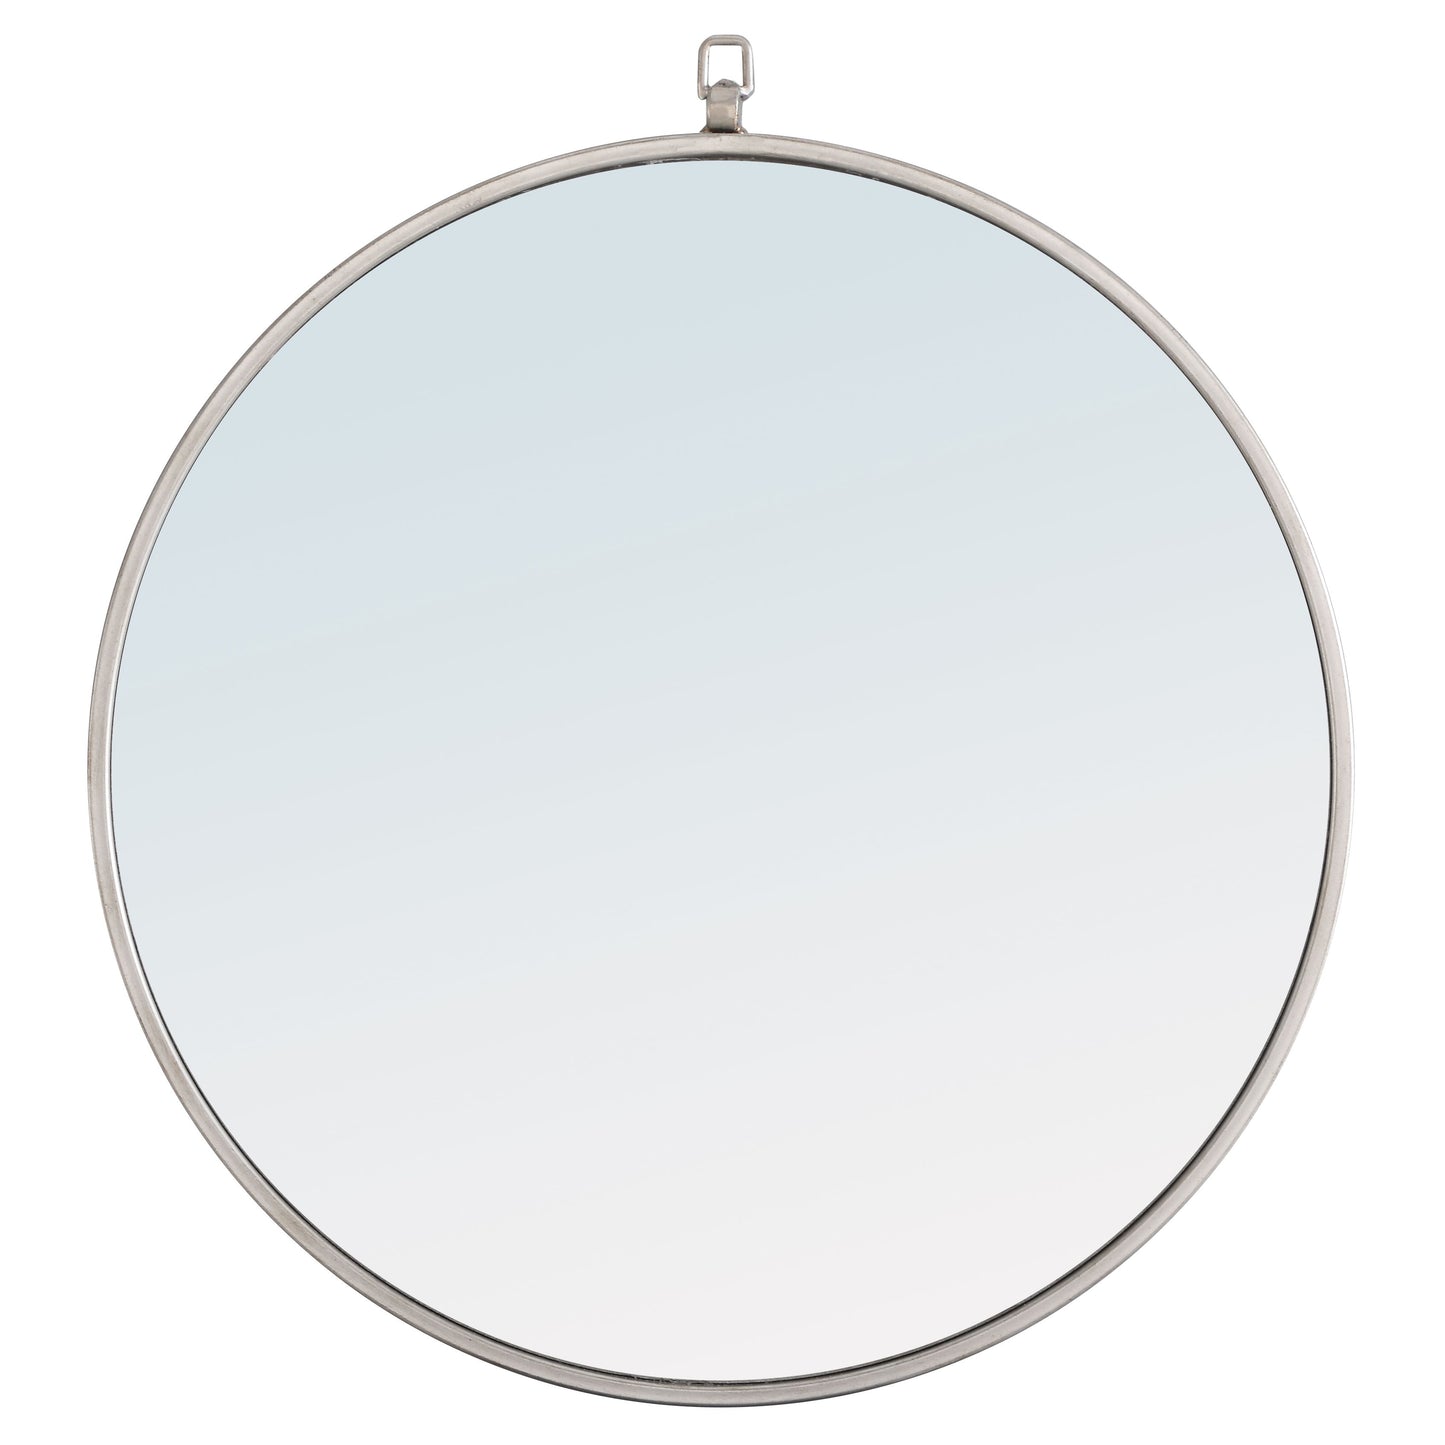 MR4053S Rowan 24" x 24" Metal Framed Round Mirror with Decorative Hook in Silver